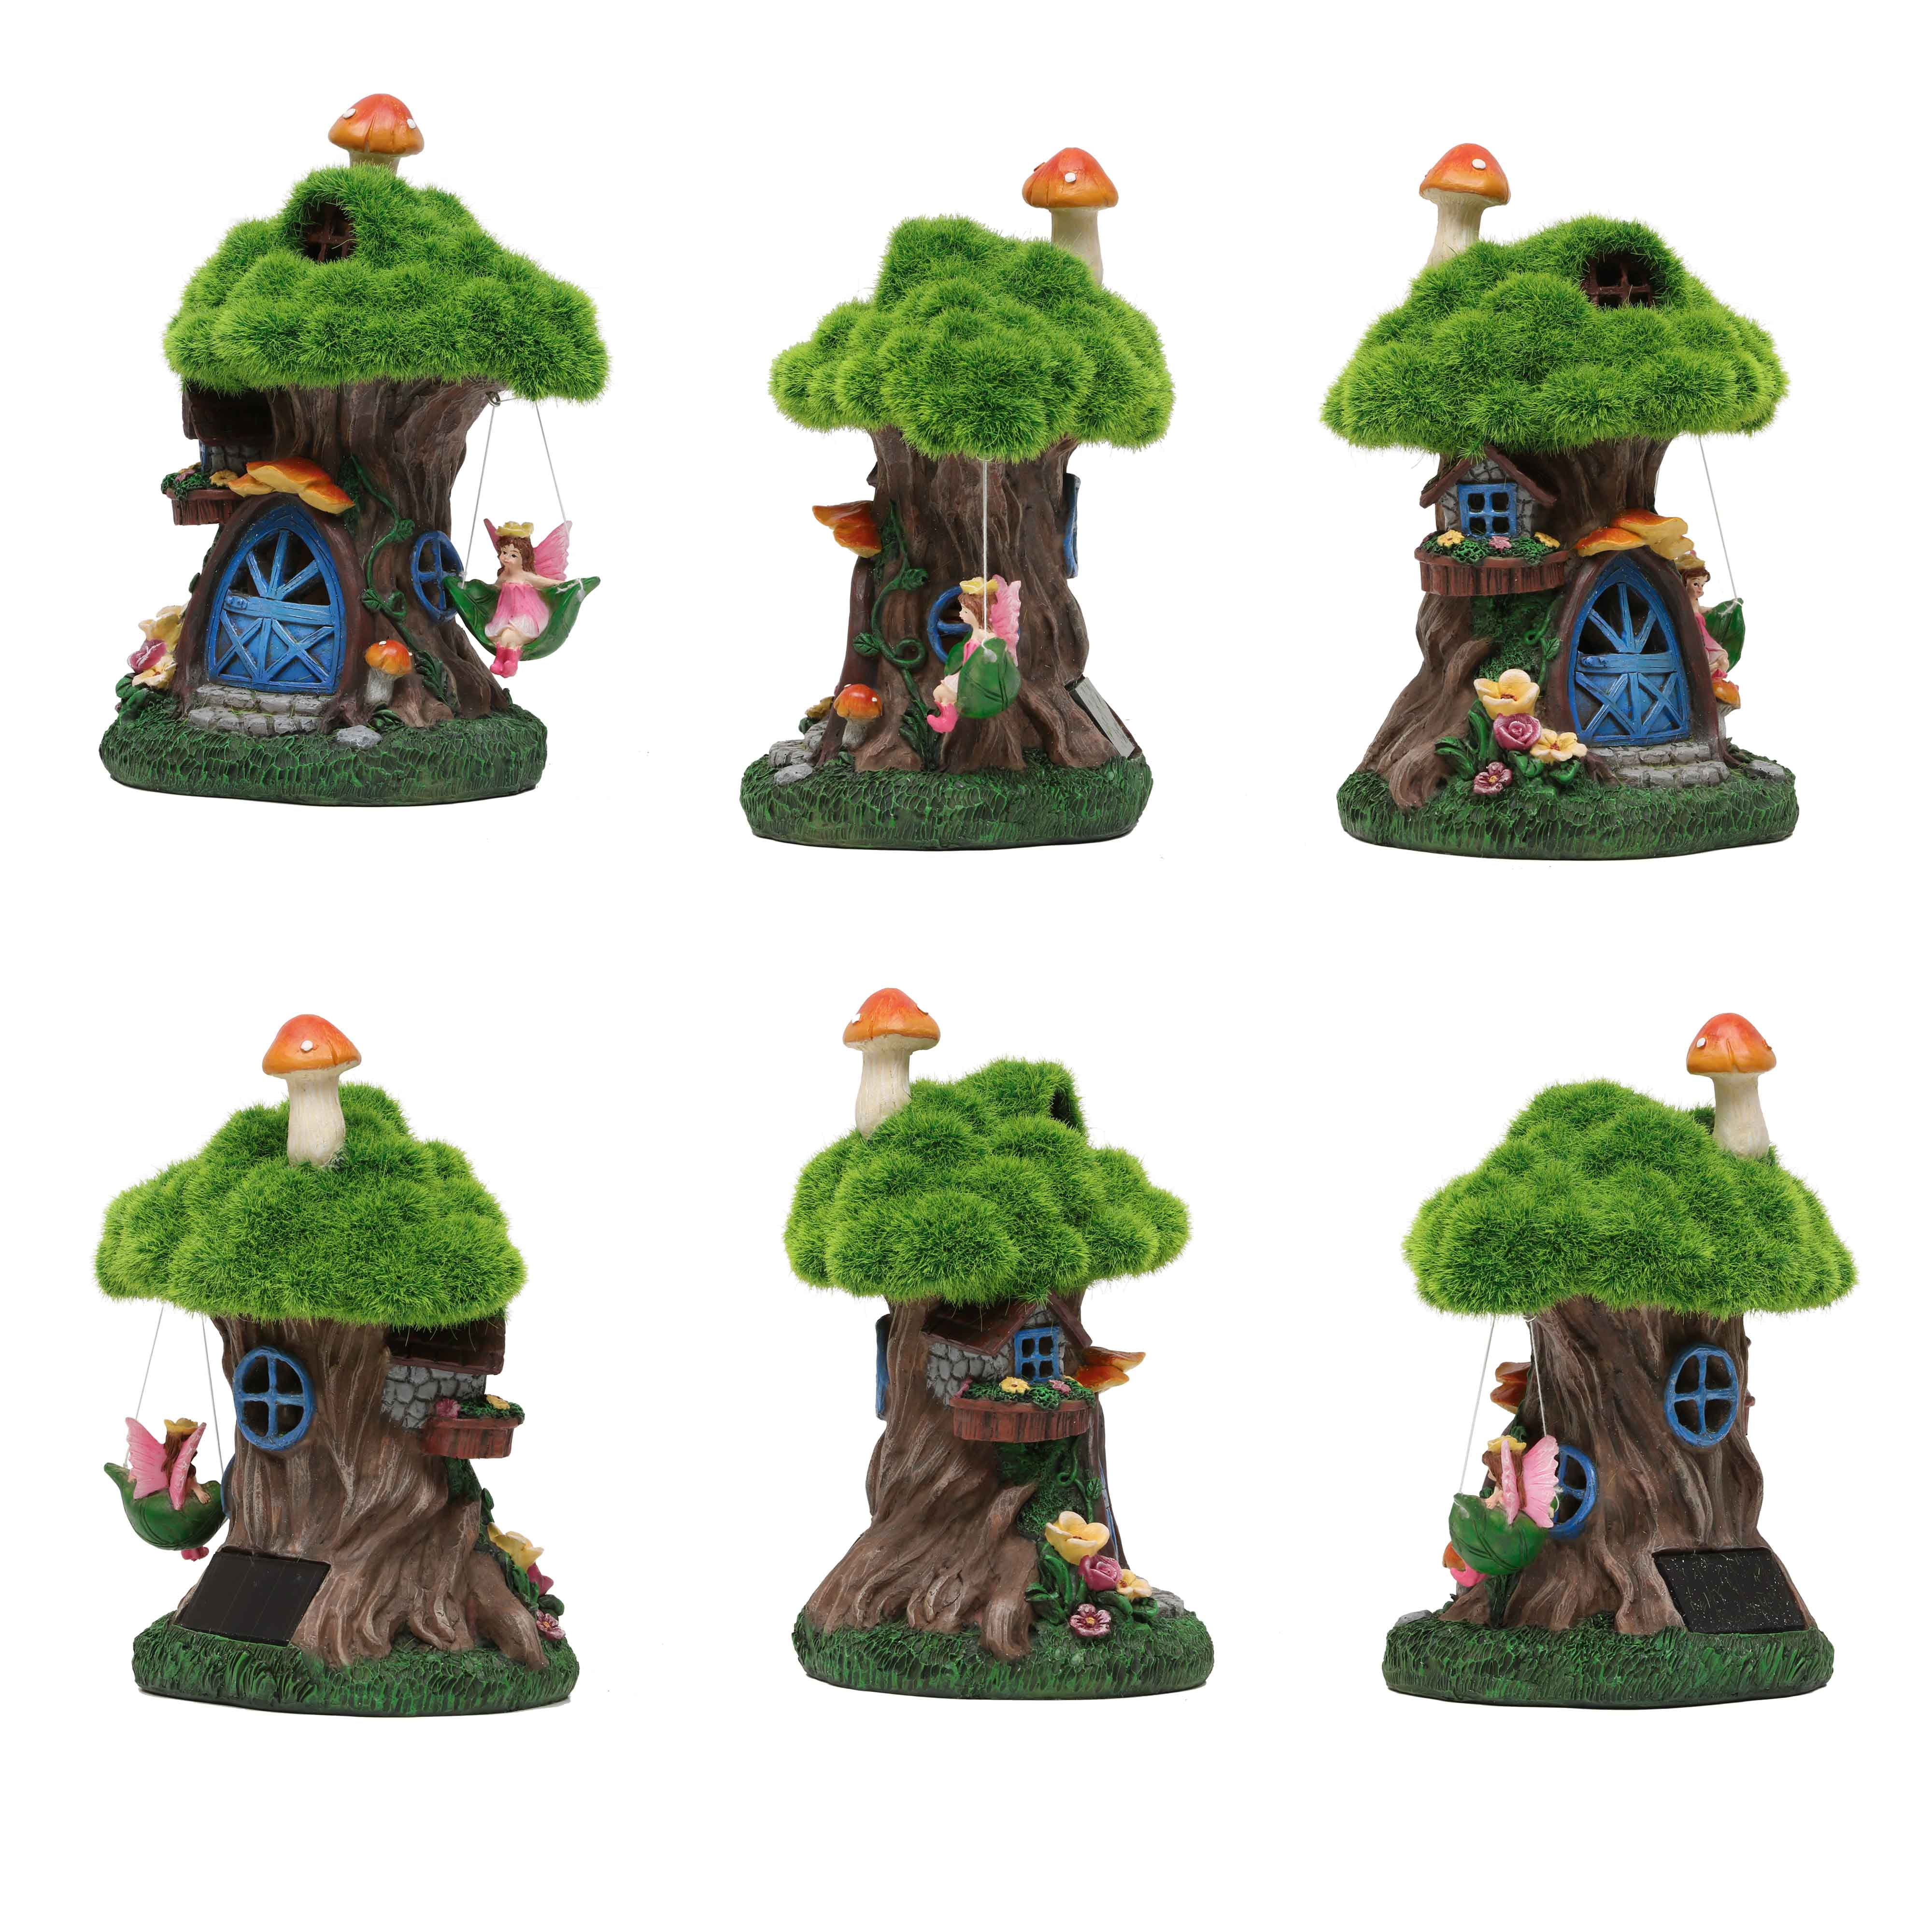 Teresa's Collections 7.7 Flocked Fairy House Garden Statues with Solar  Lights, Resin Moss Outdoor Cottage Figurines with Fairy, Treehouse Lawn  Ornaments for Patio Yard Decor, 5.7 in x 4.5 in x 7.7